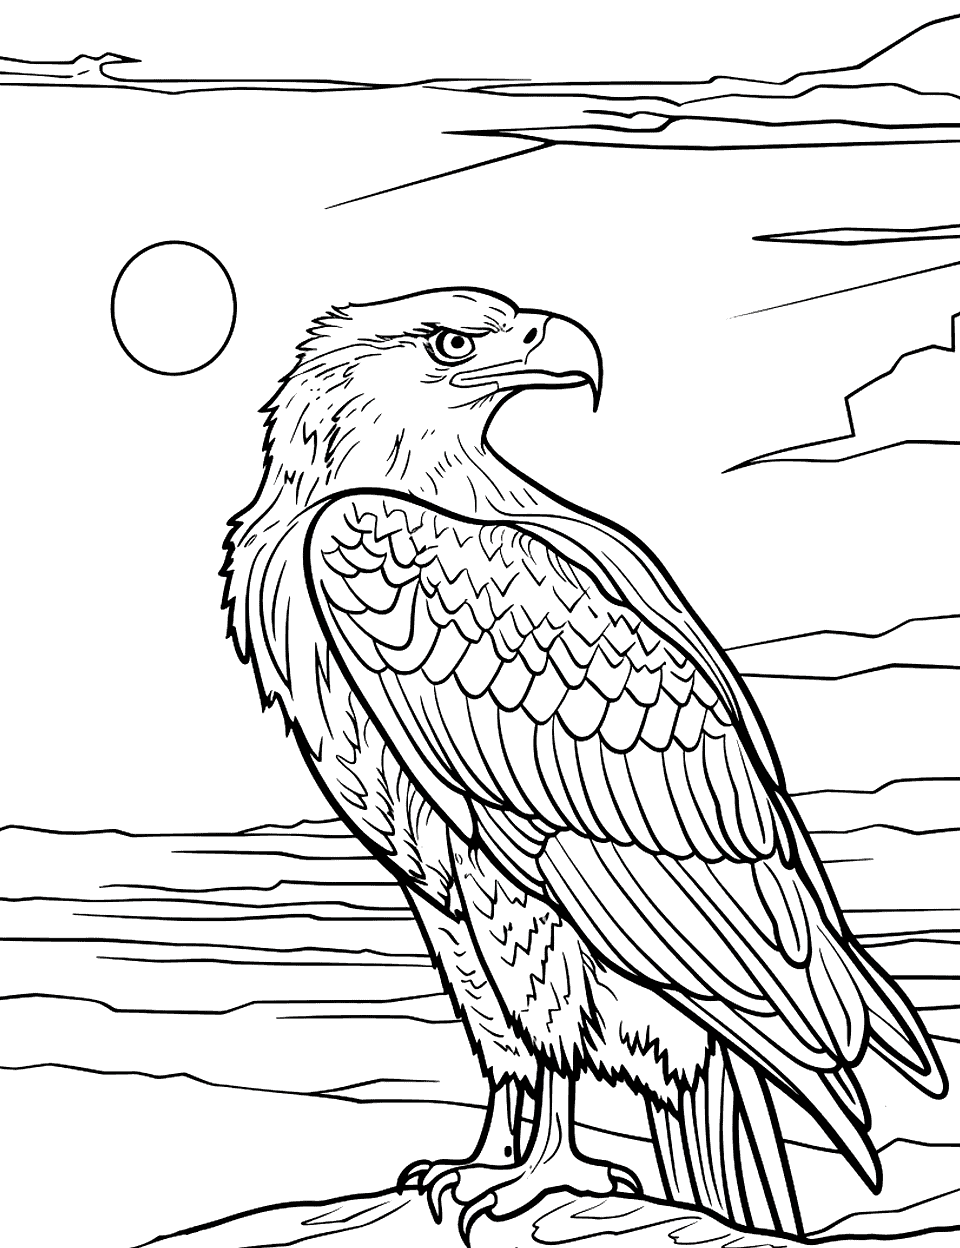 Eagle Watching the Sunset Coloring Page - An eagle gazes toward the horizon as the sun sets.